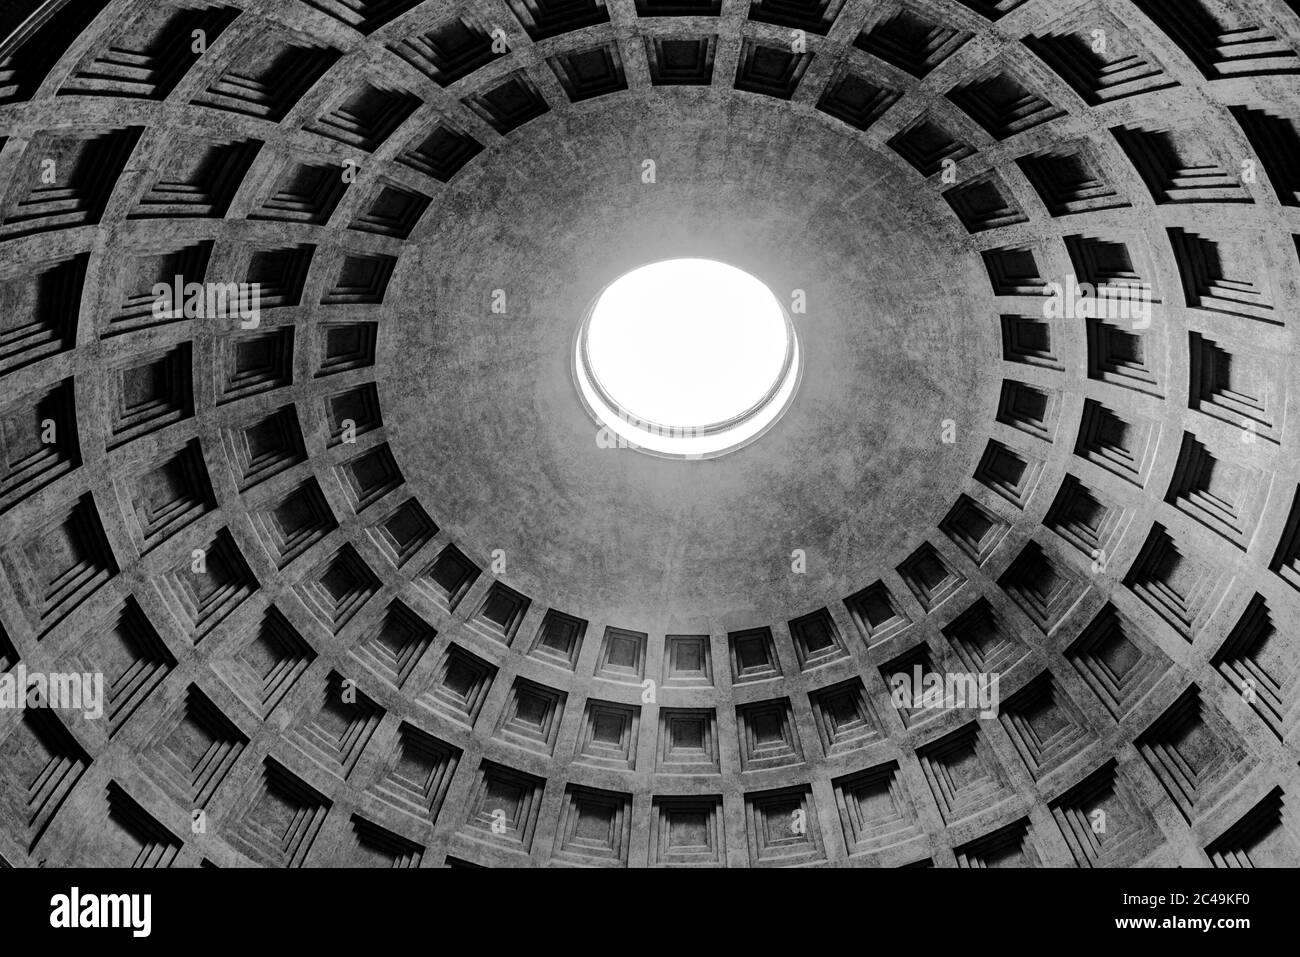 ROME, ITALY - MAY 05, 2019: Monumental ceiling of Pantheon - church and former Roman temple, Rome, Italy. Black and white image. Stock Photo